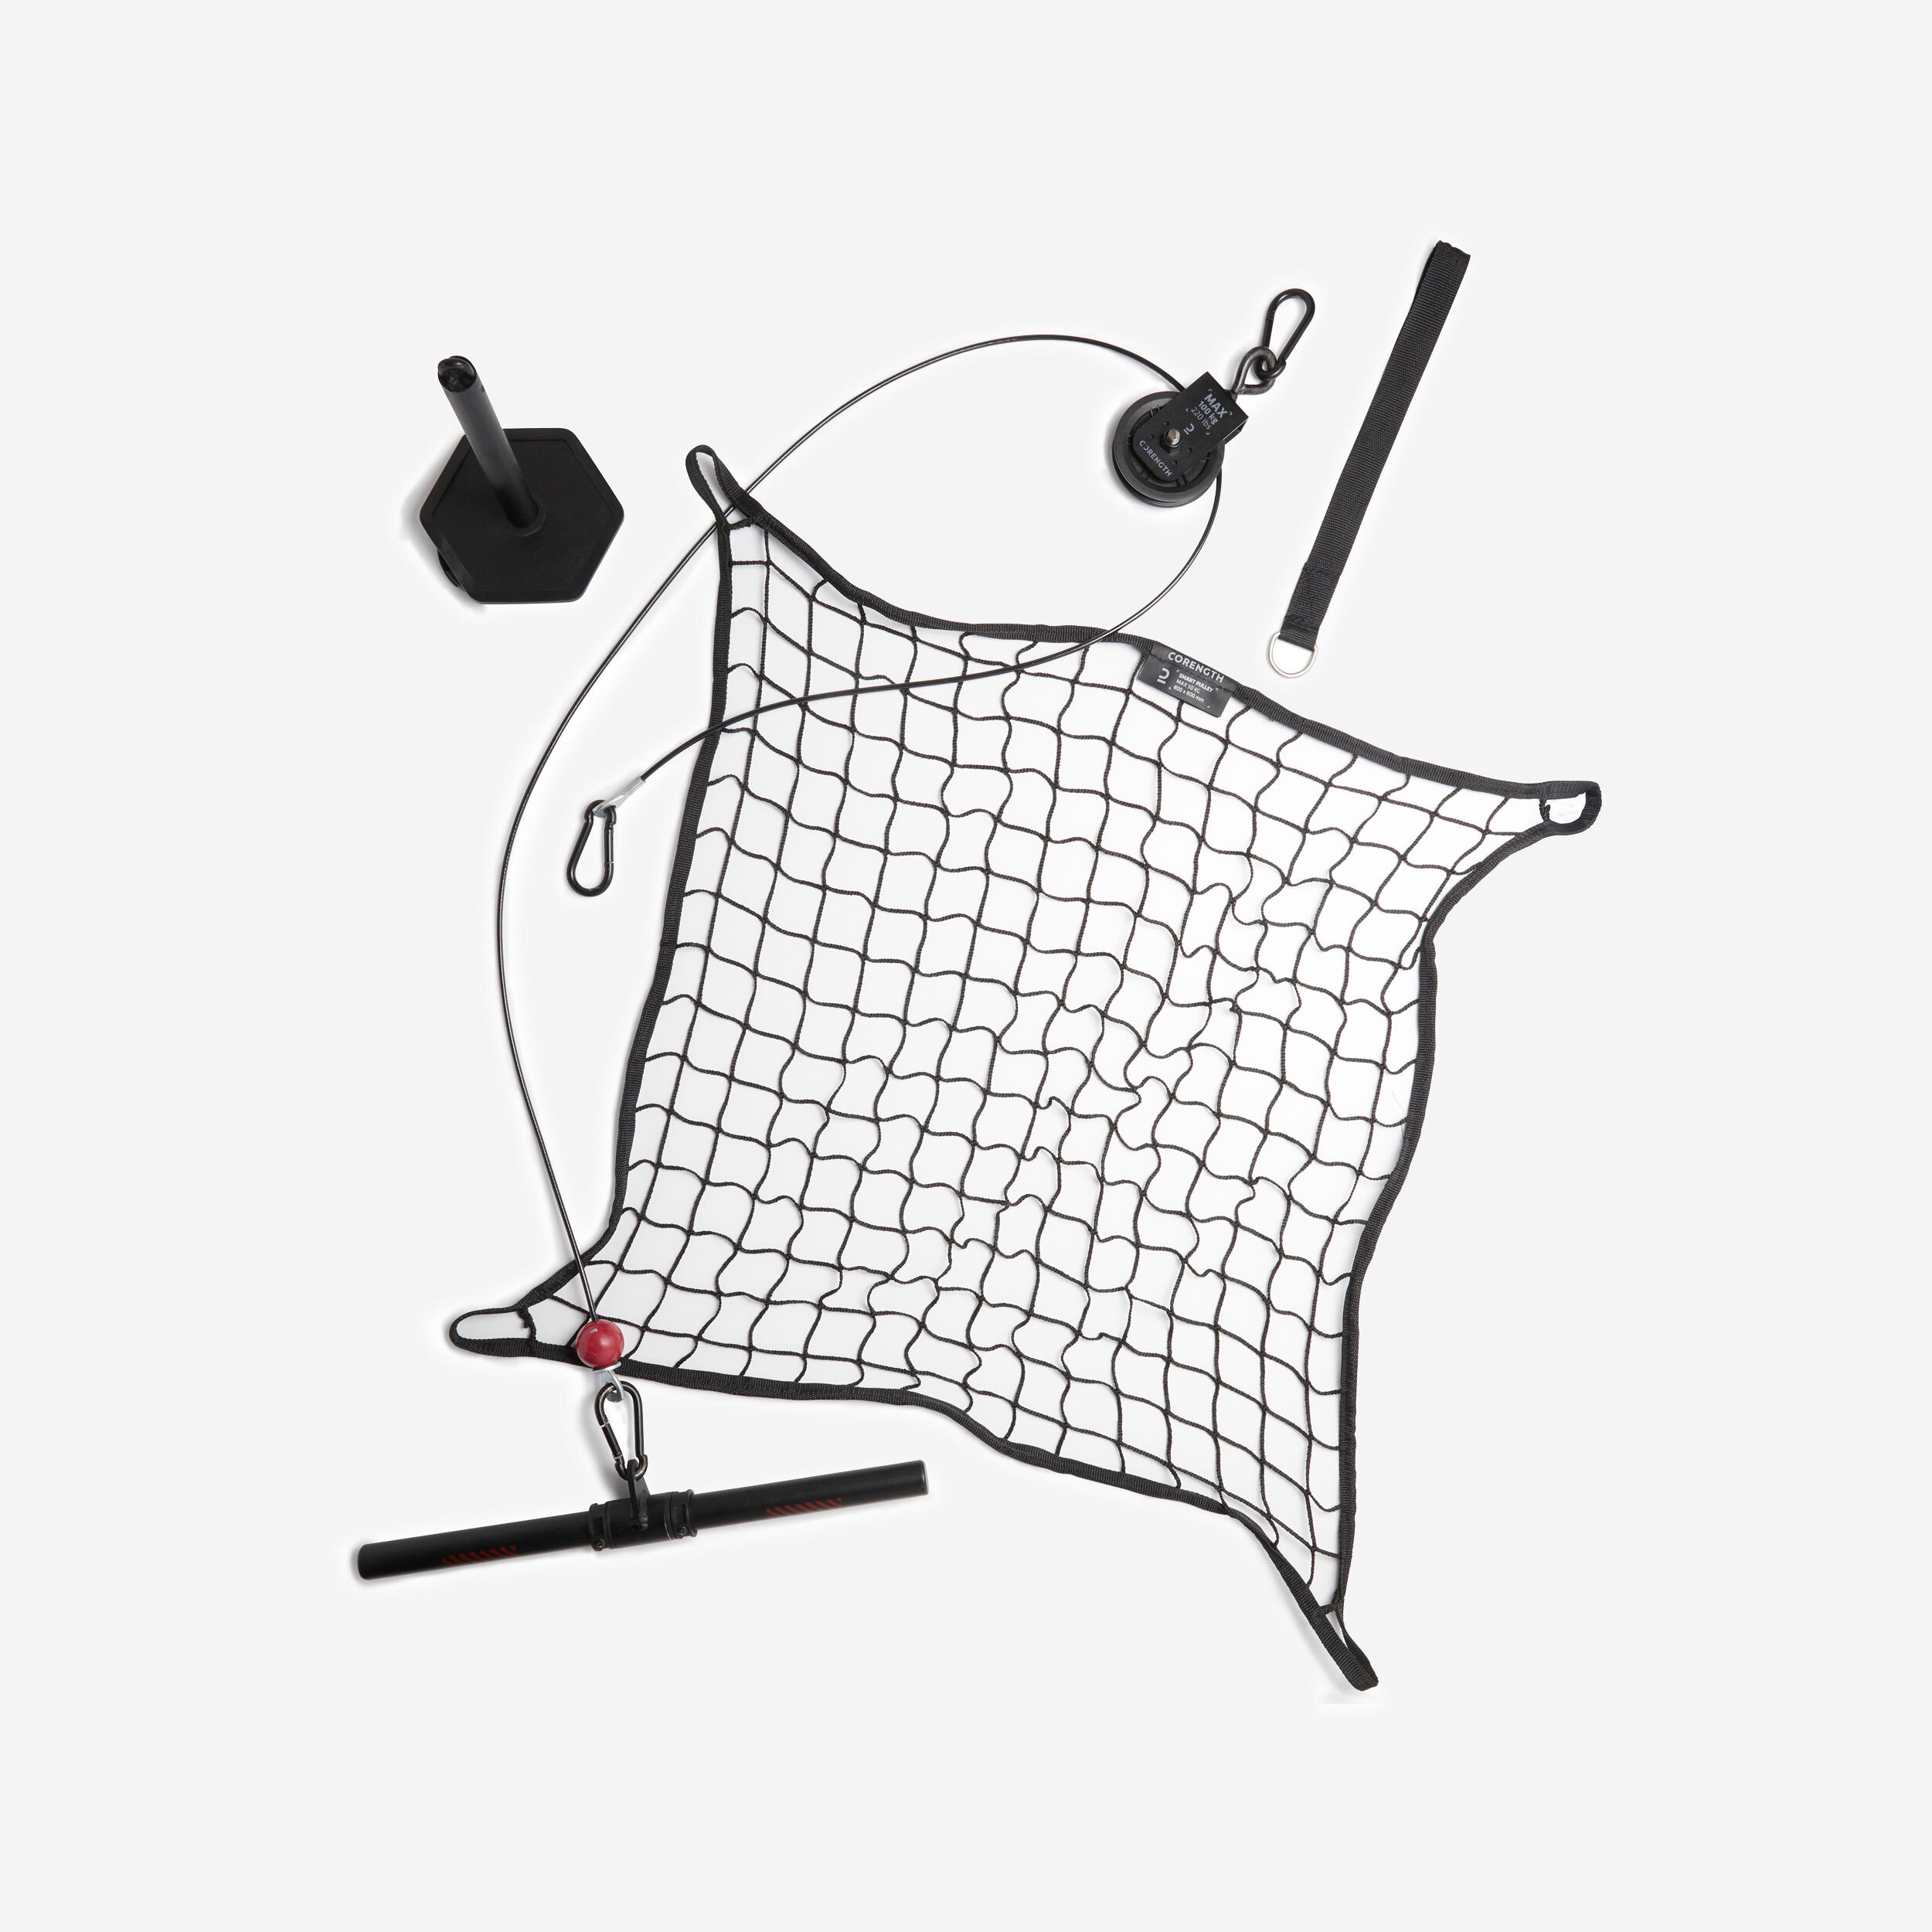 CORENGTH Weight Training Pulley Station With Pull Bar, Weights Holder and Net